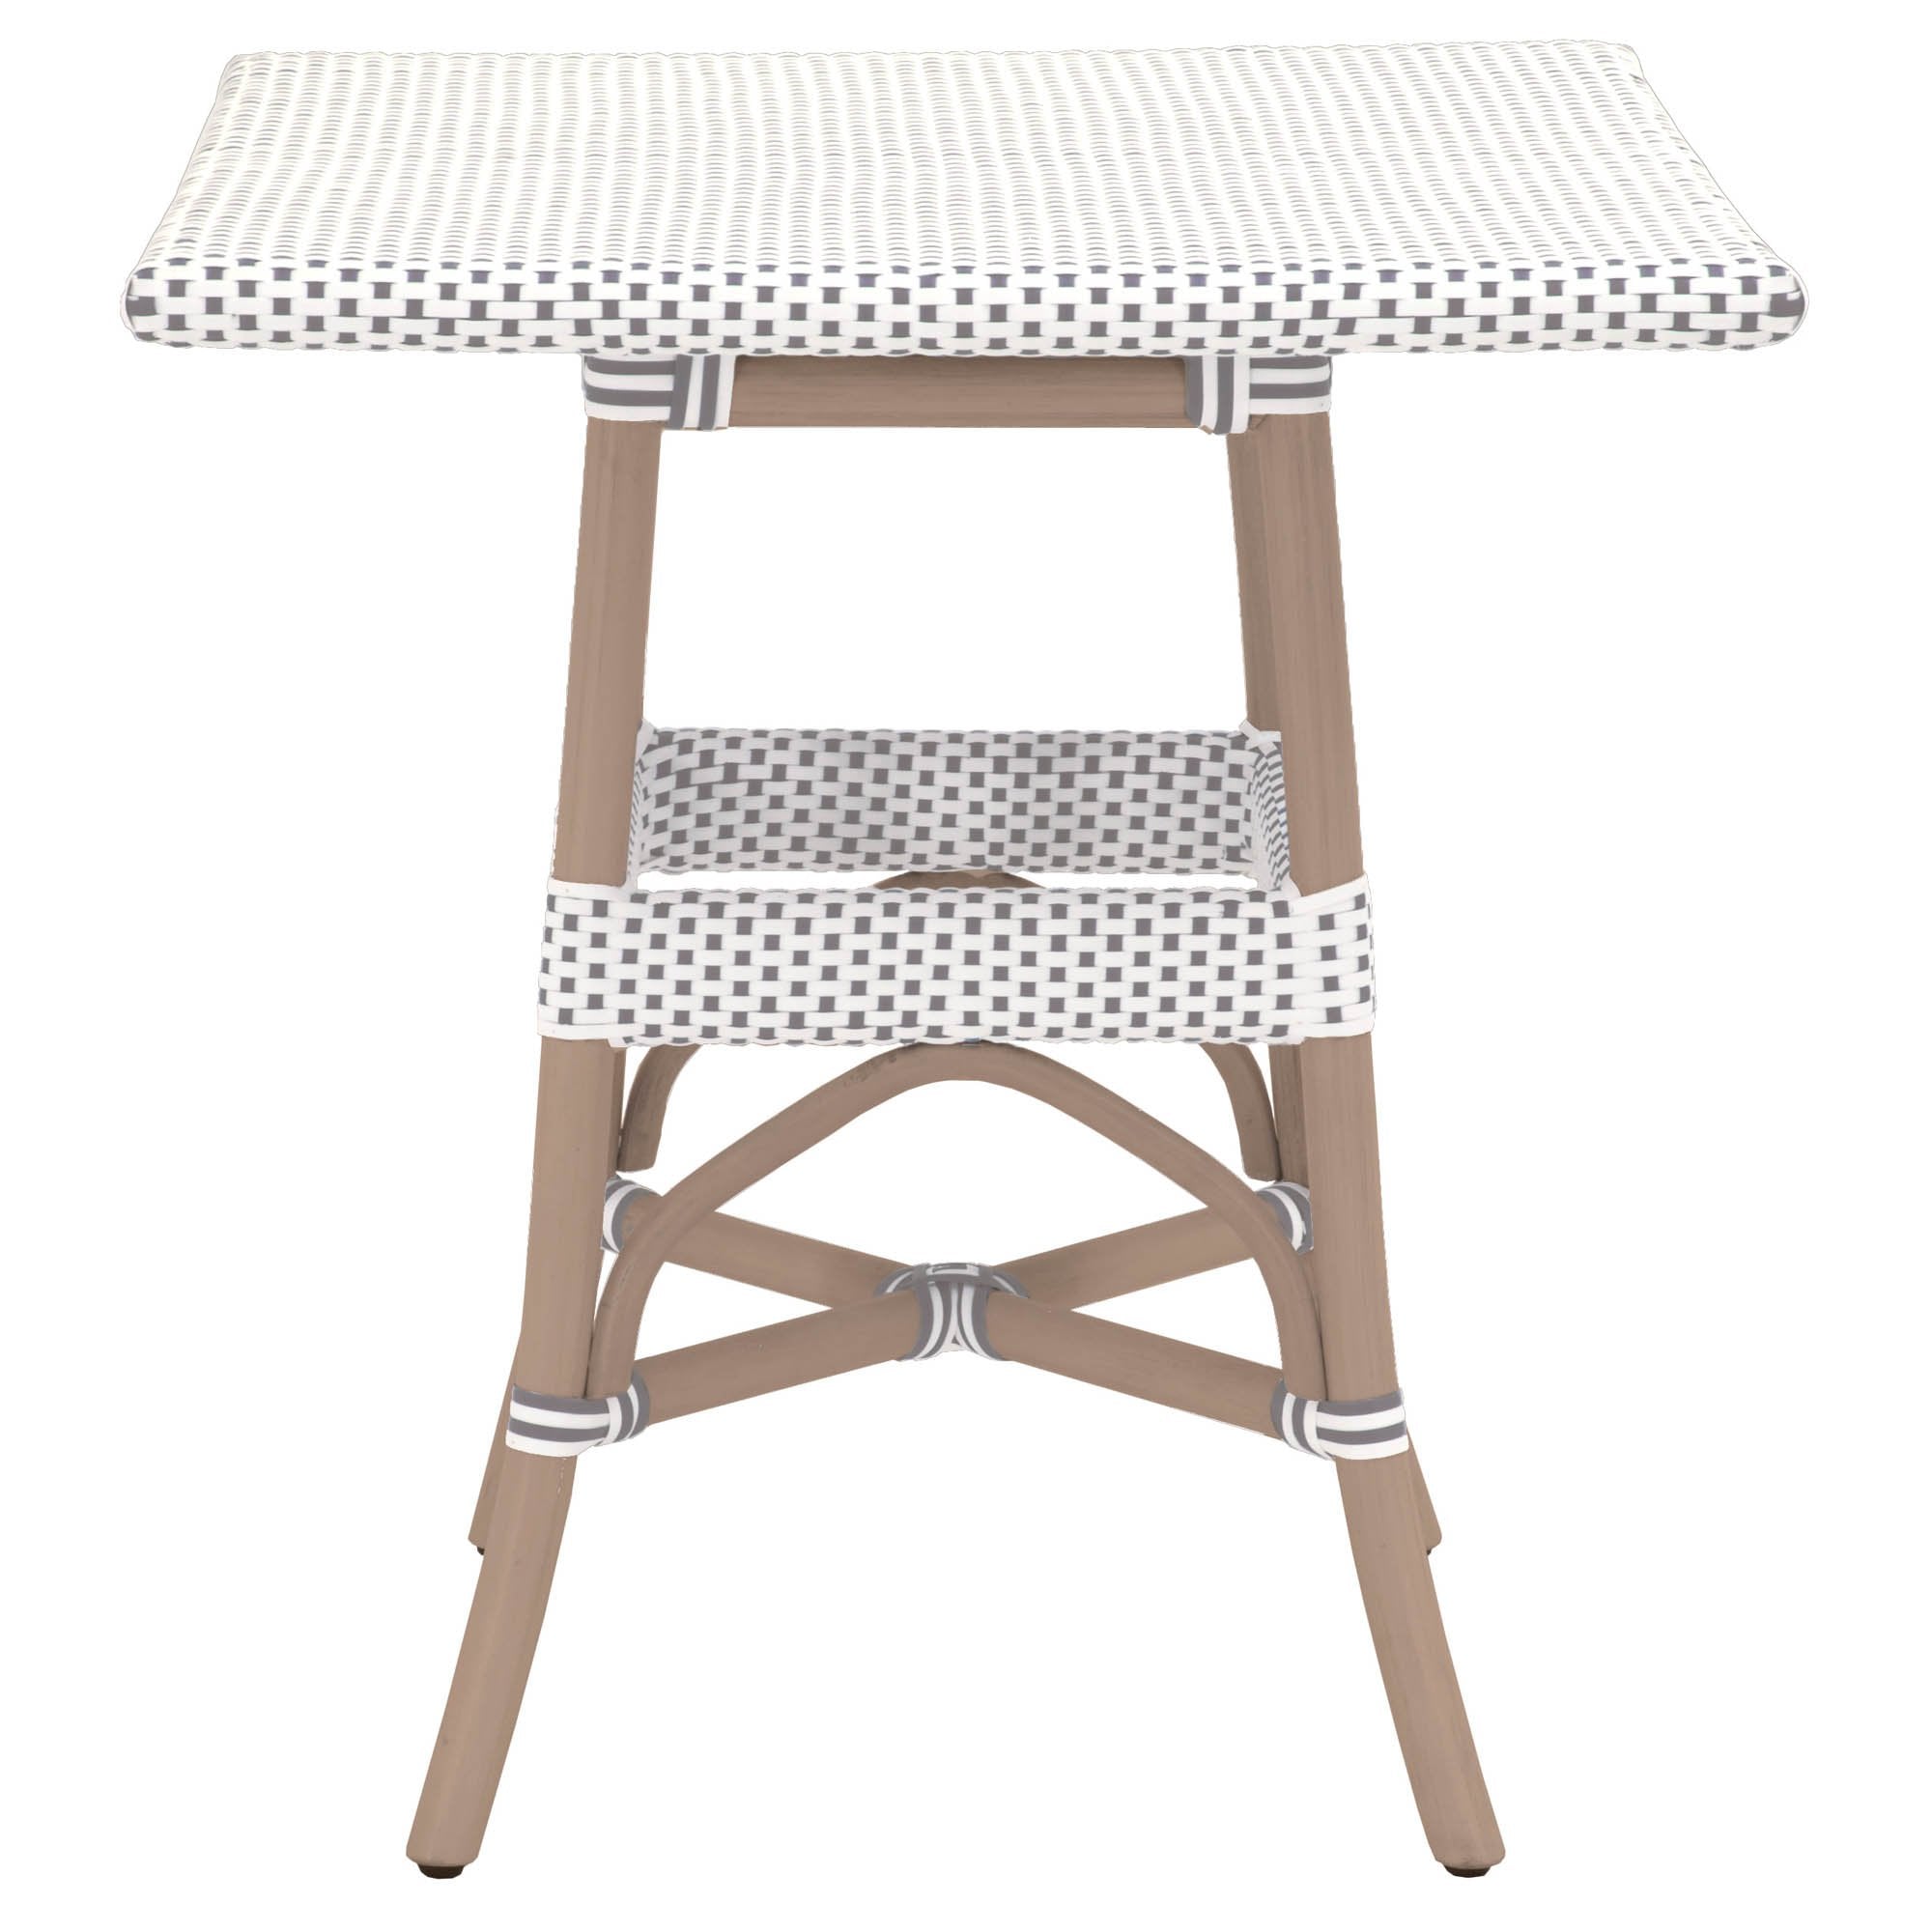 Paris Square Dining Table in Gray & White Check